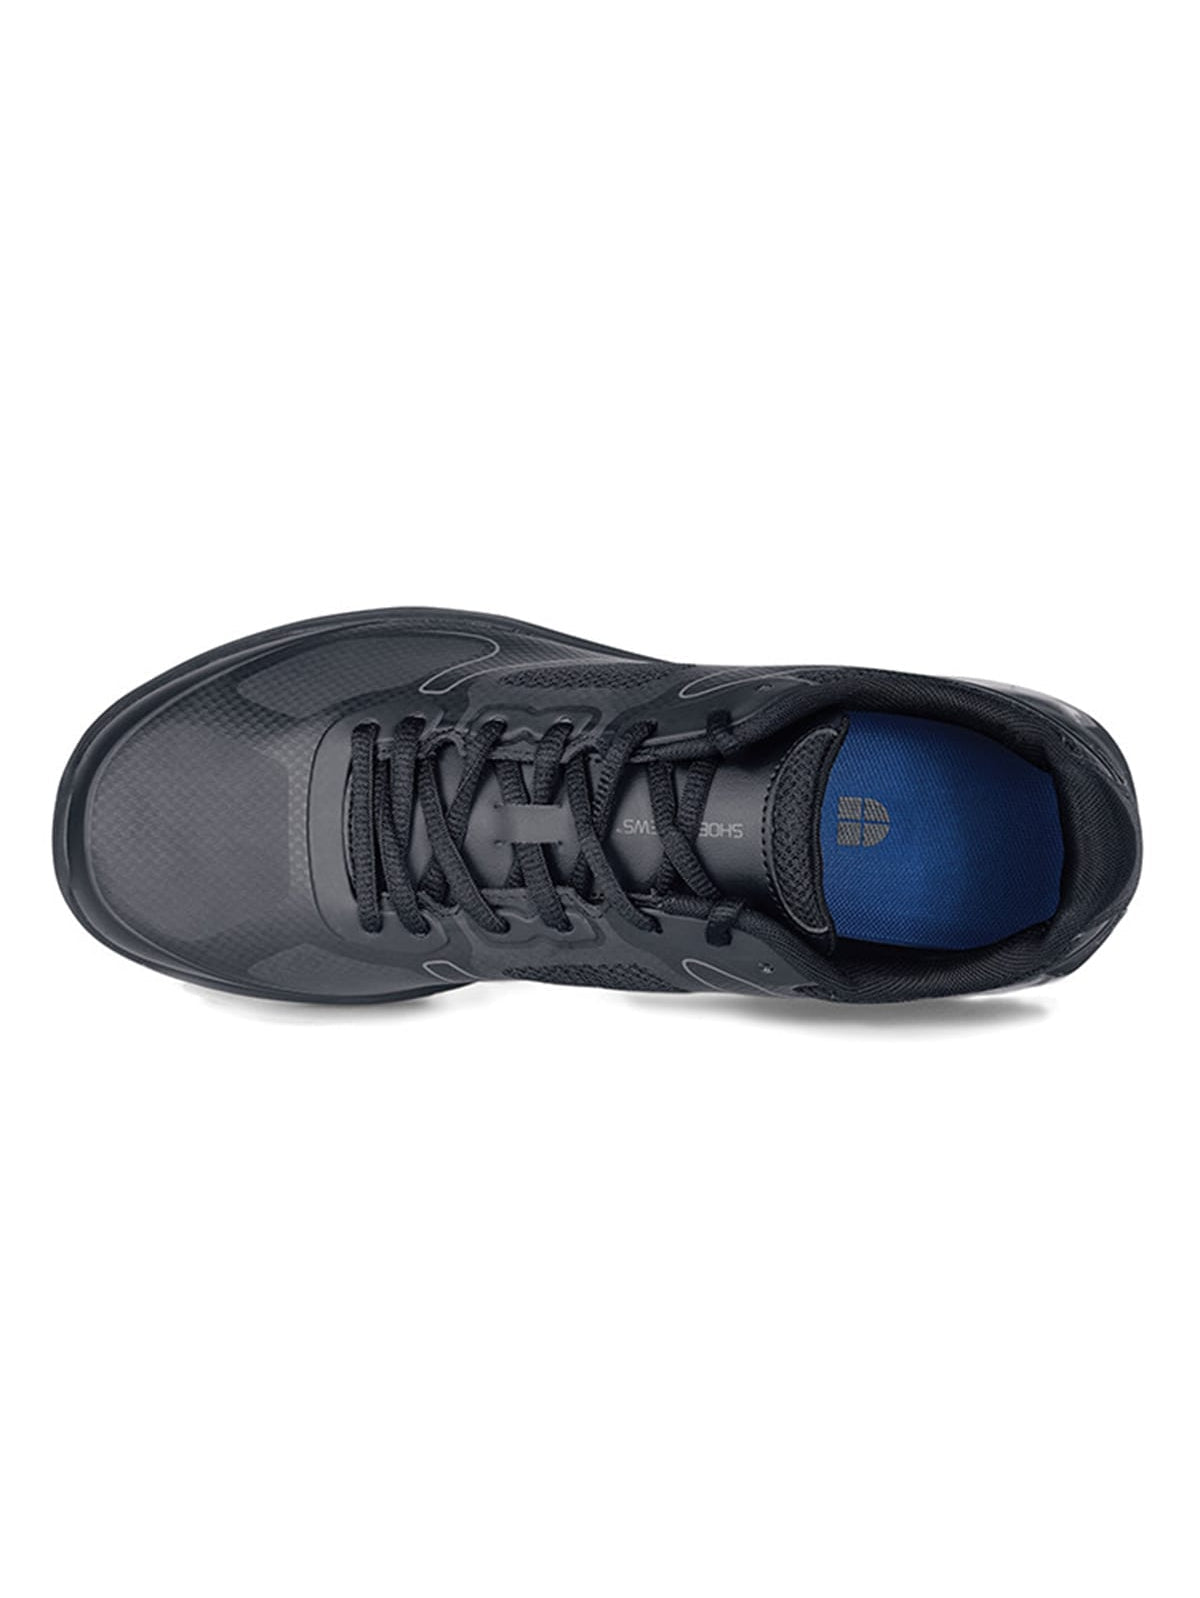 Women's Work Shoe Revolution 2 Black by  Shoes For Crews.